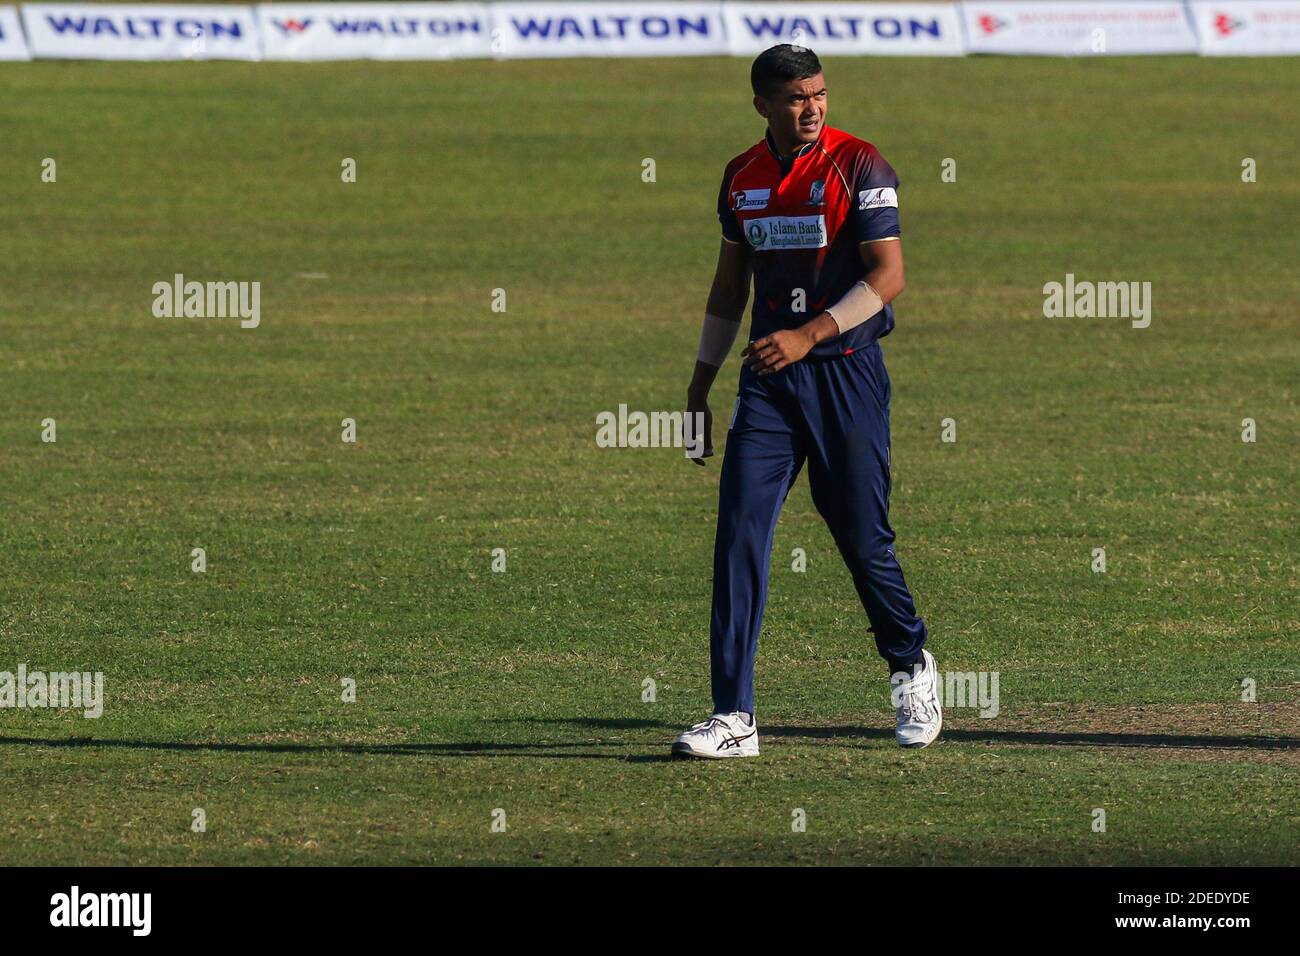 Fortune Barishal cricket player Taskin Ahmed in action during the Bangabandhu T20 Cup 2020 between Fortune Barishal and Gazi Group Chattagram at the Sher-e-Bangla National Cricket Stadium.(Gazi Group Chittagong won by 10 runs) Stock Photo